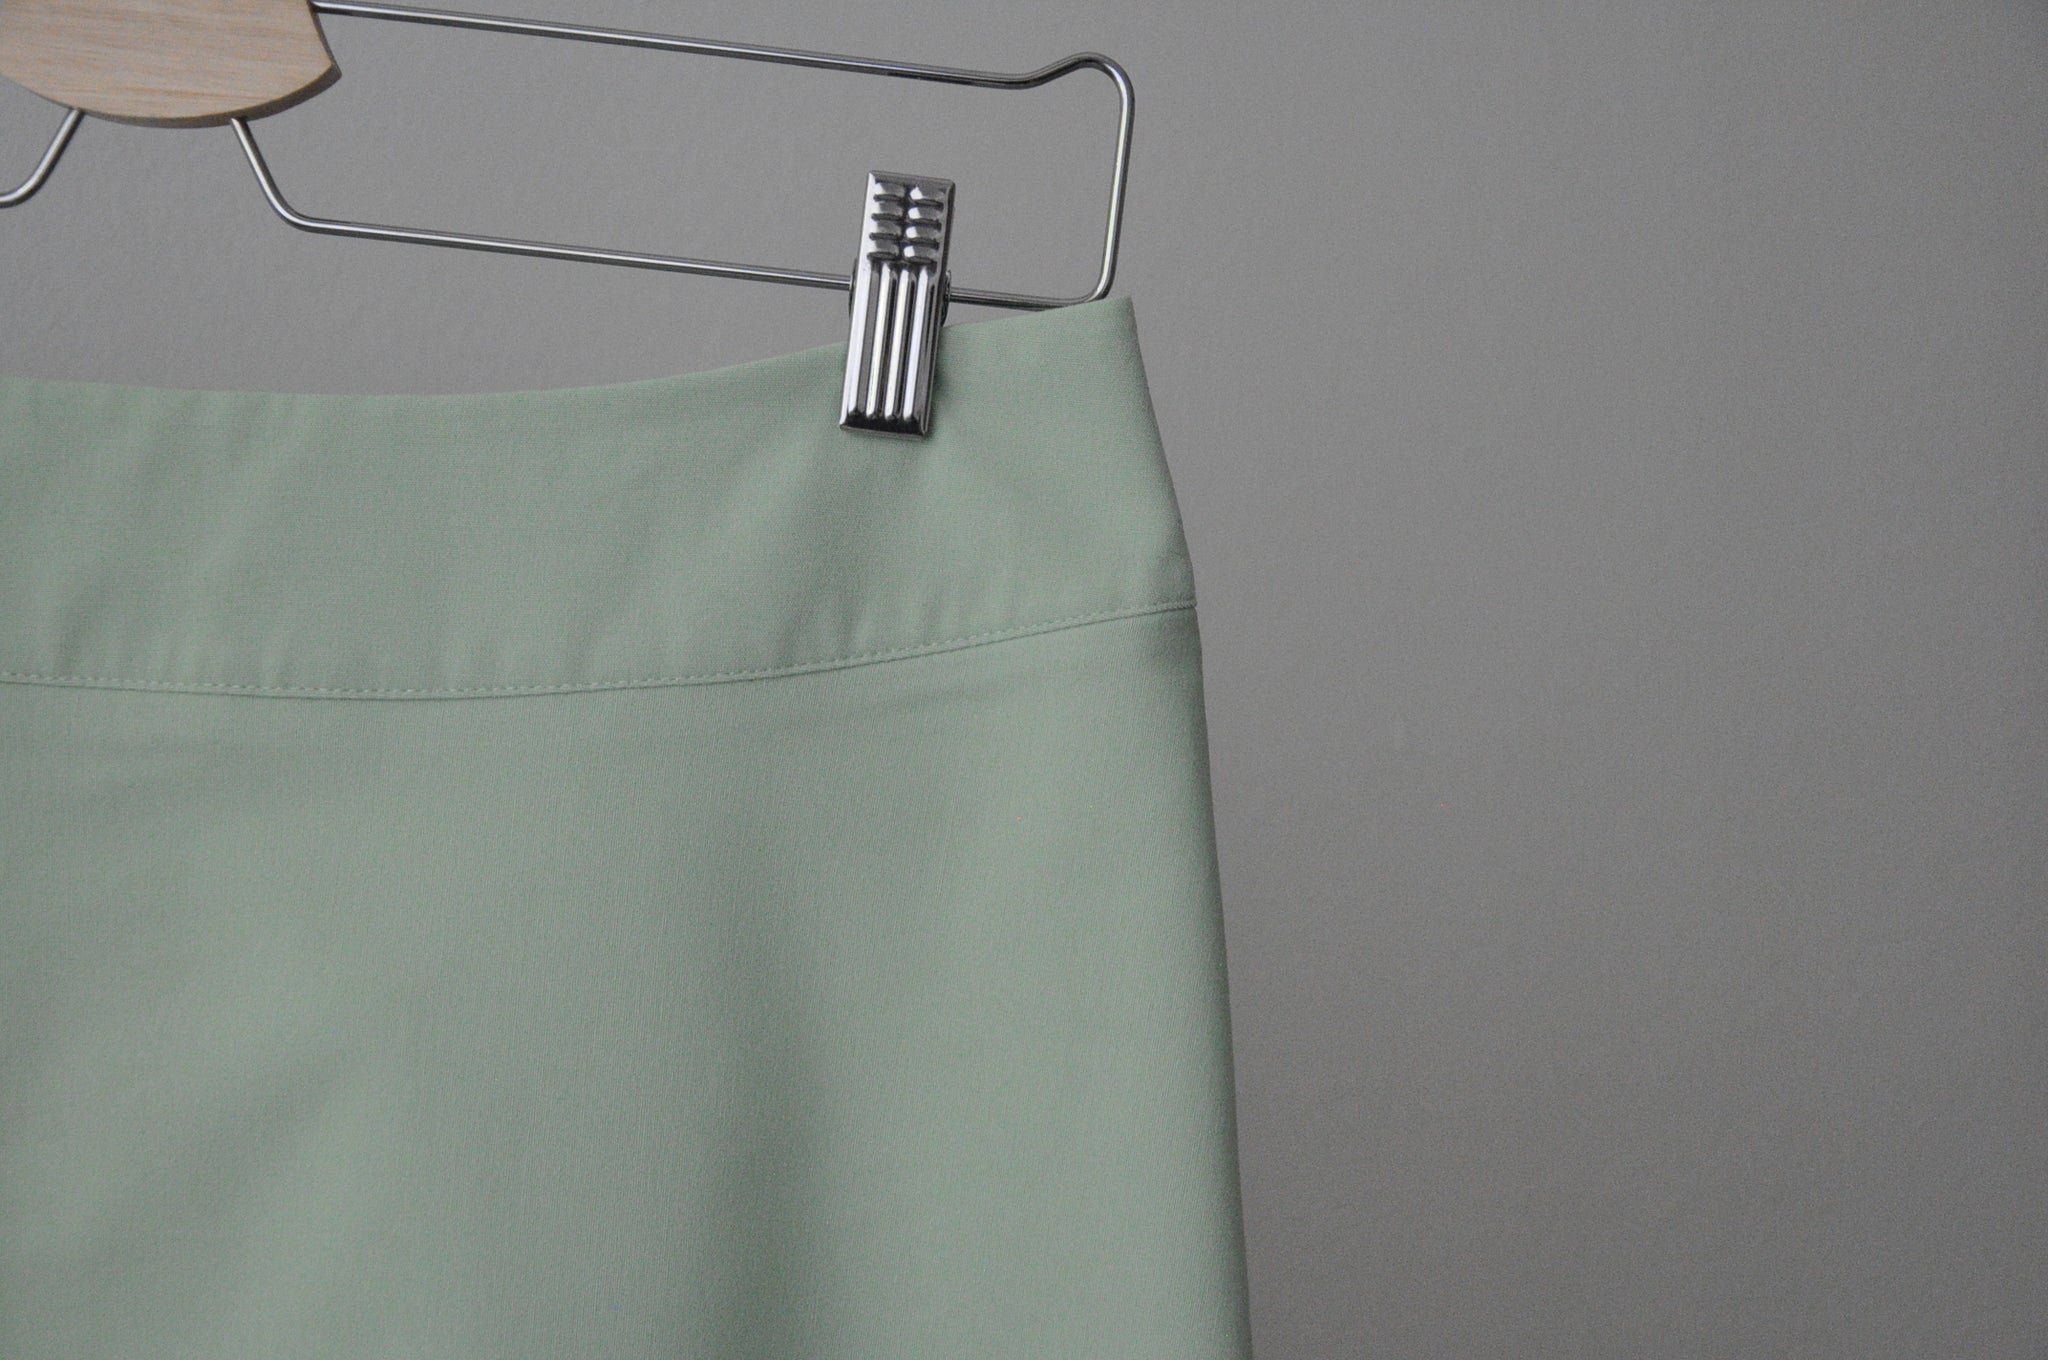 A-line skirt in mint / M-L